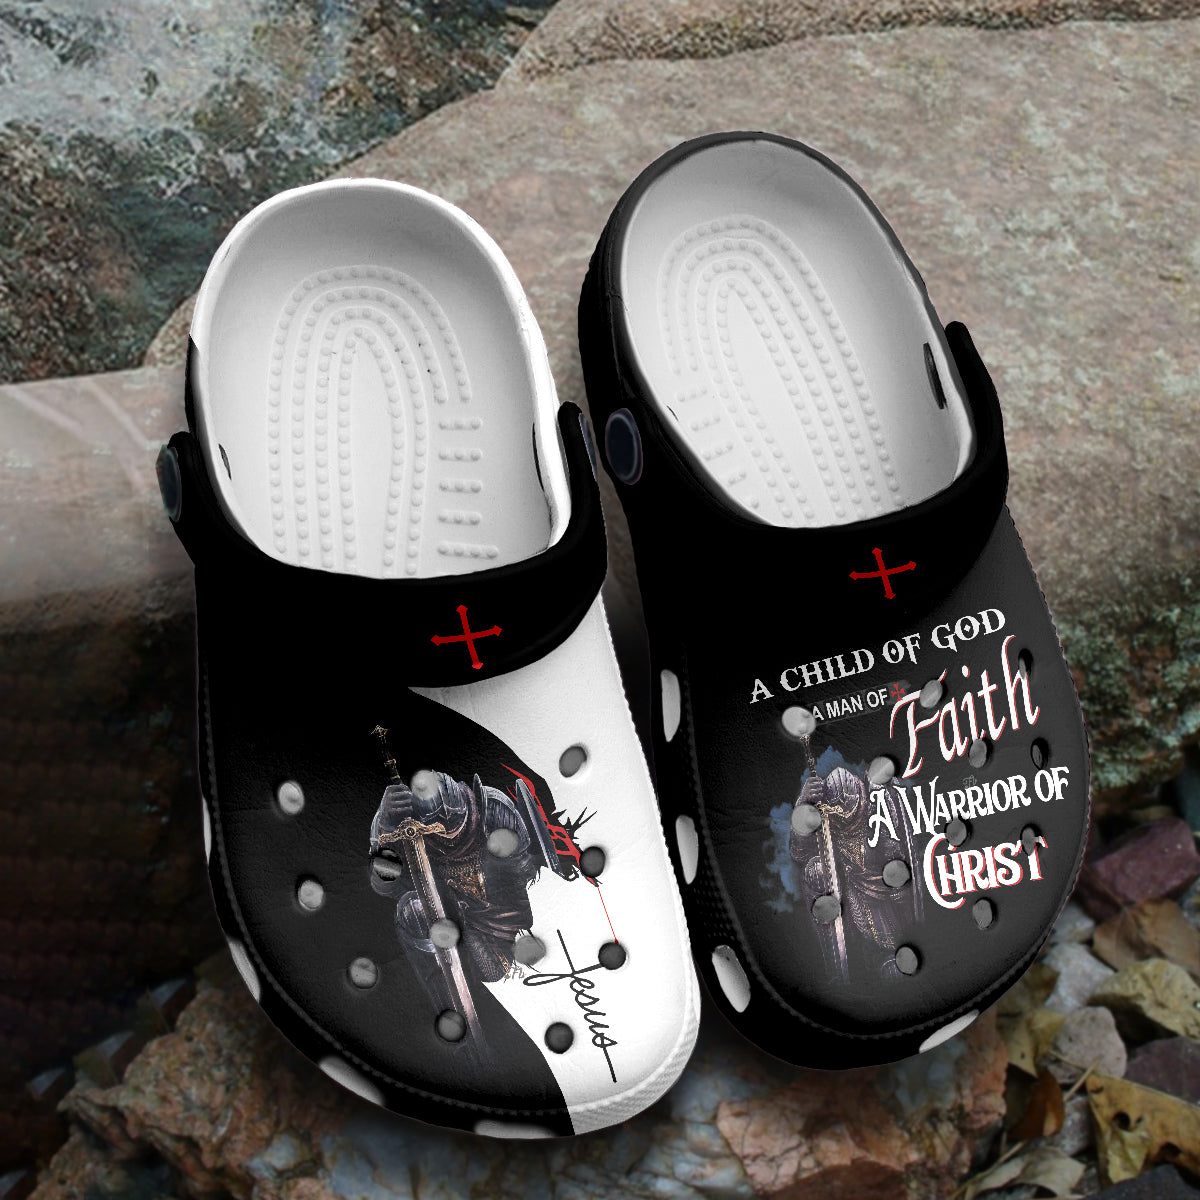 A Child Of God Crocs Crocband Clogs Shoes Comfortable For Men Women and Kids Jesus Portrait Clogs Son Of God Gifts Religious